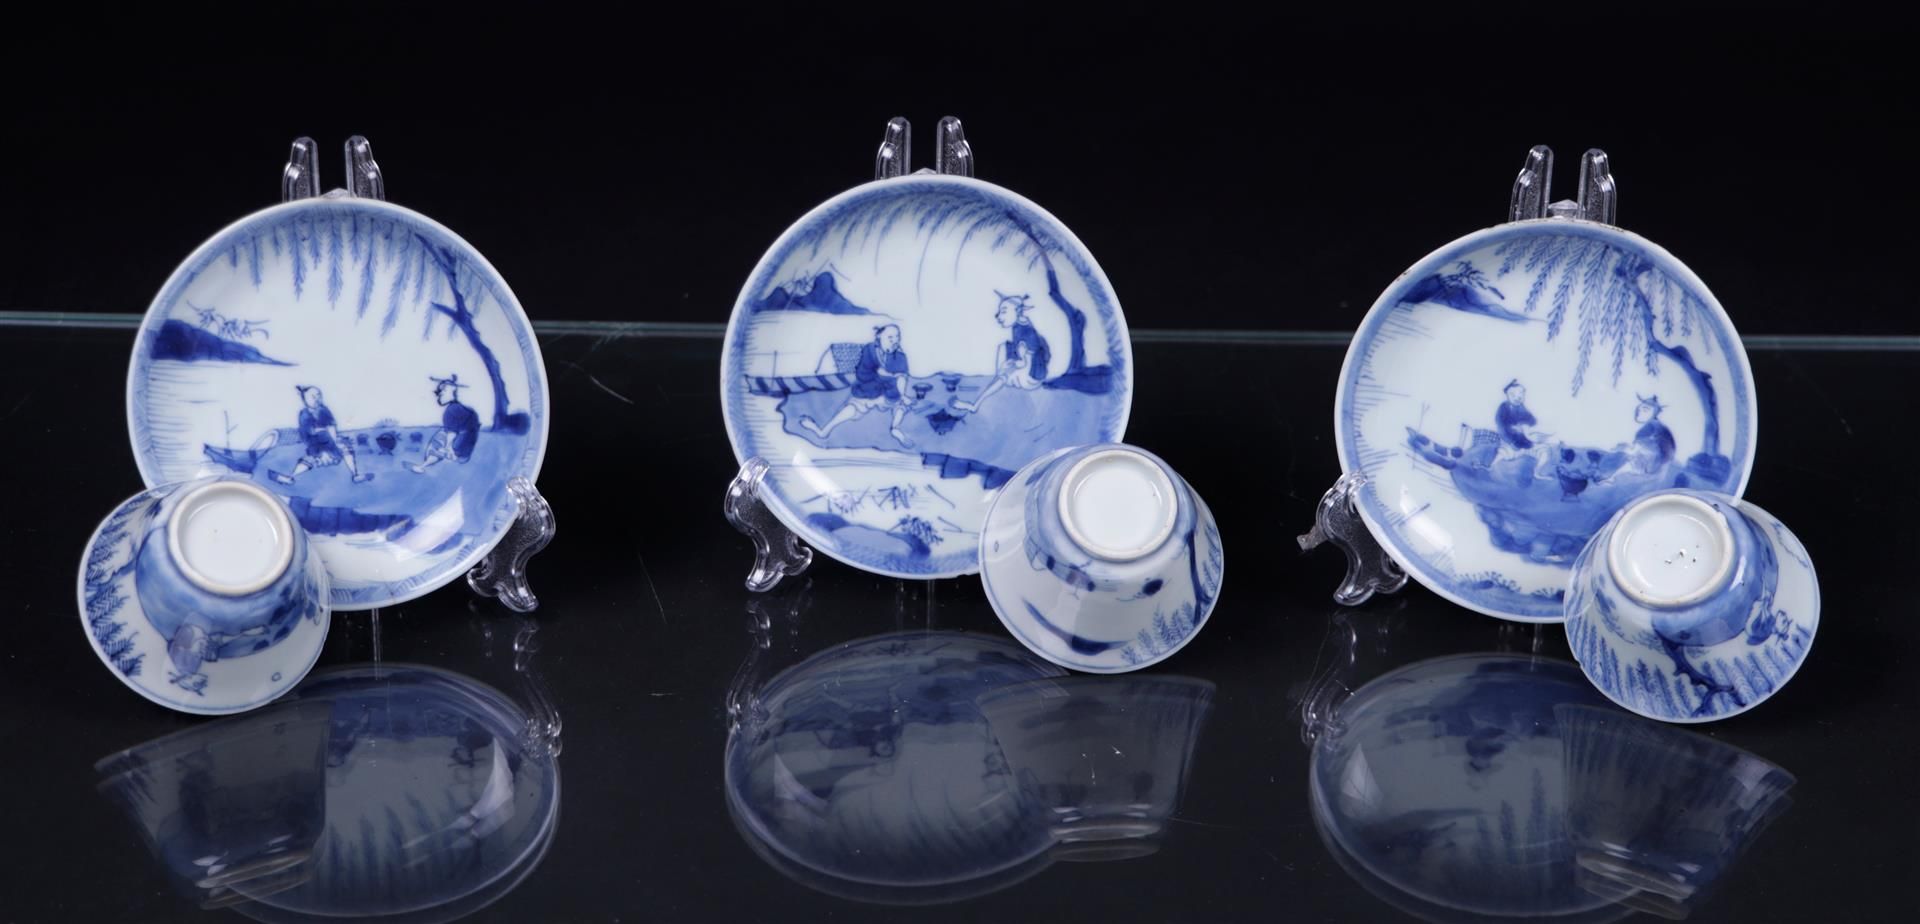 Three crazy cups and saucers in a landscape decor with a lotus border. China, Qianlong.
Diam. 10 cm. - Image 3 of 3